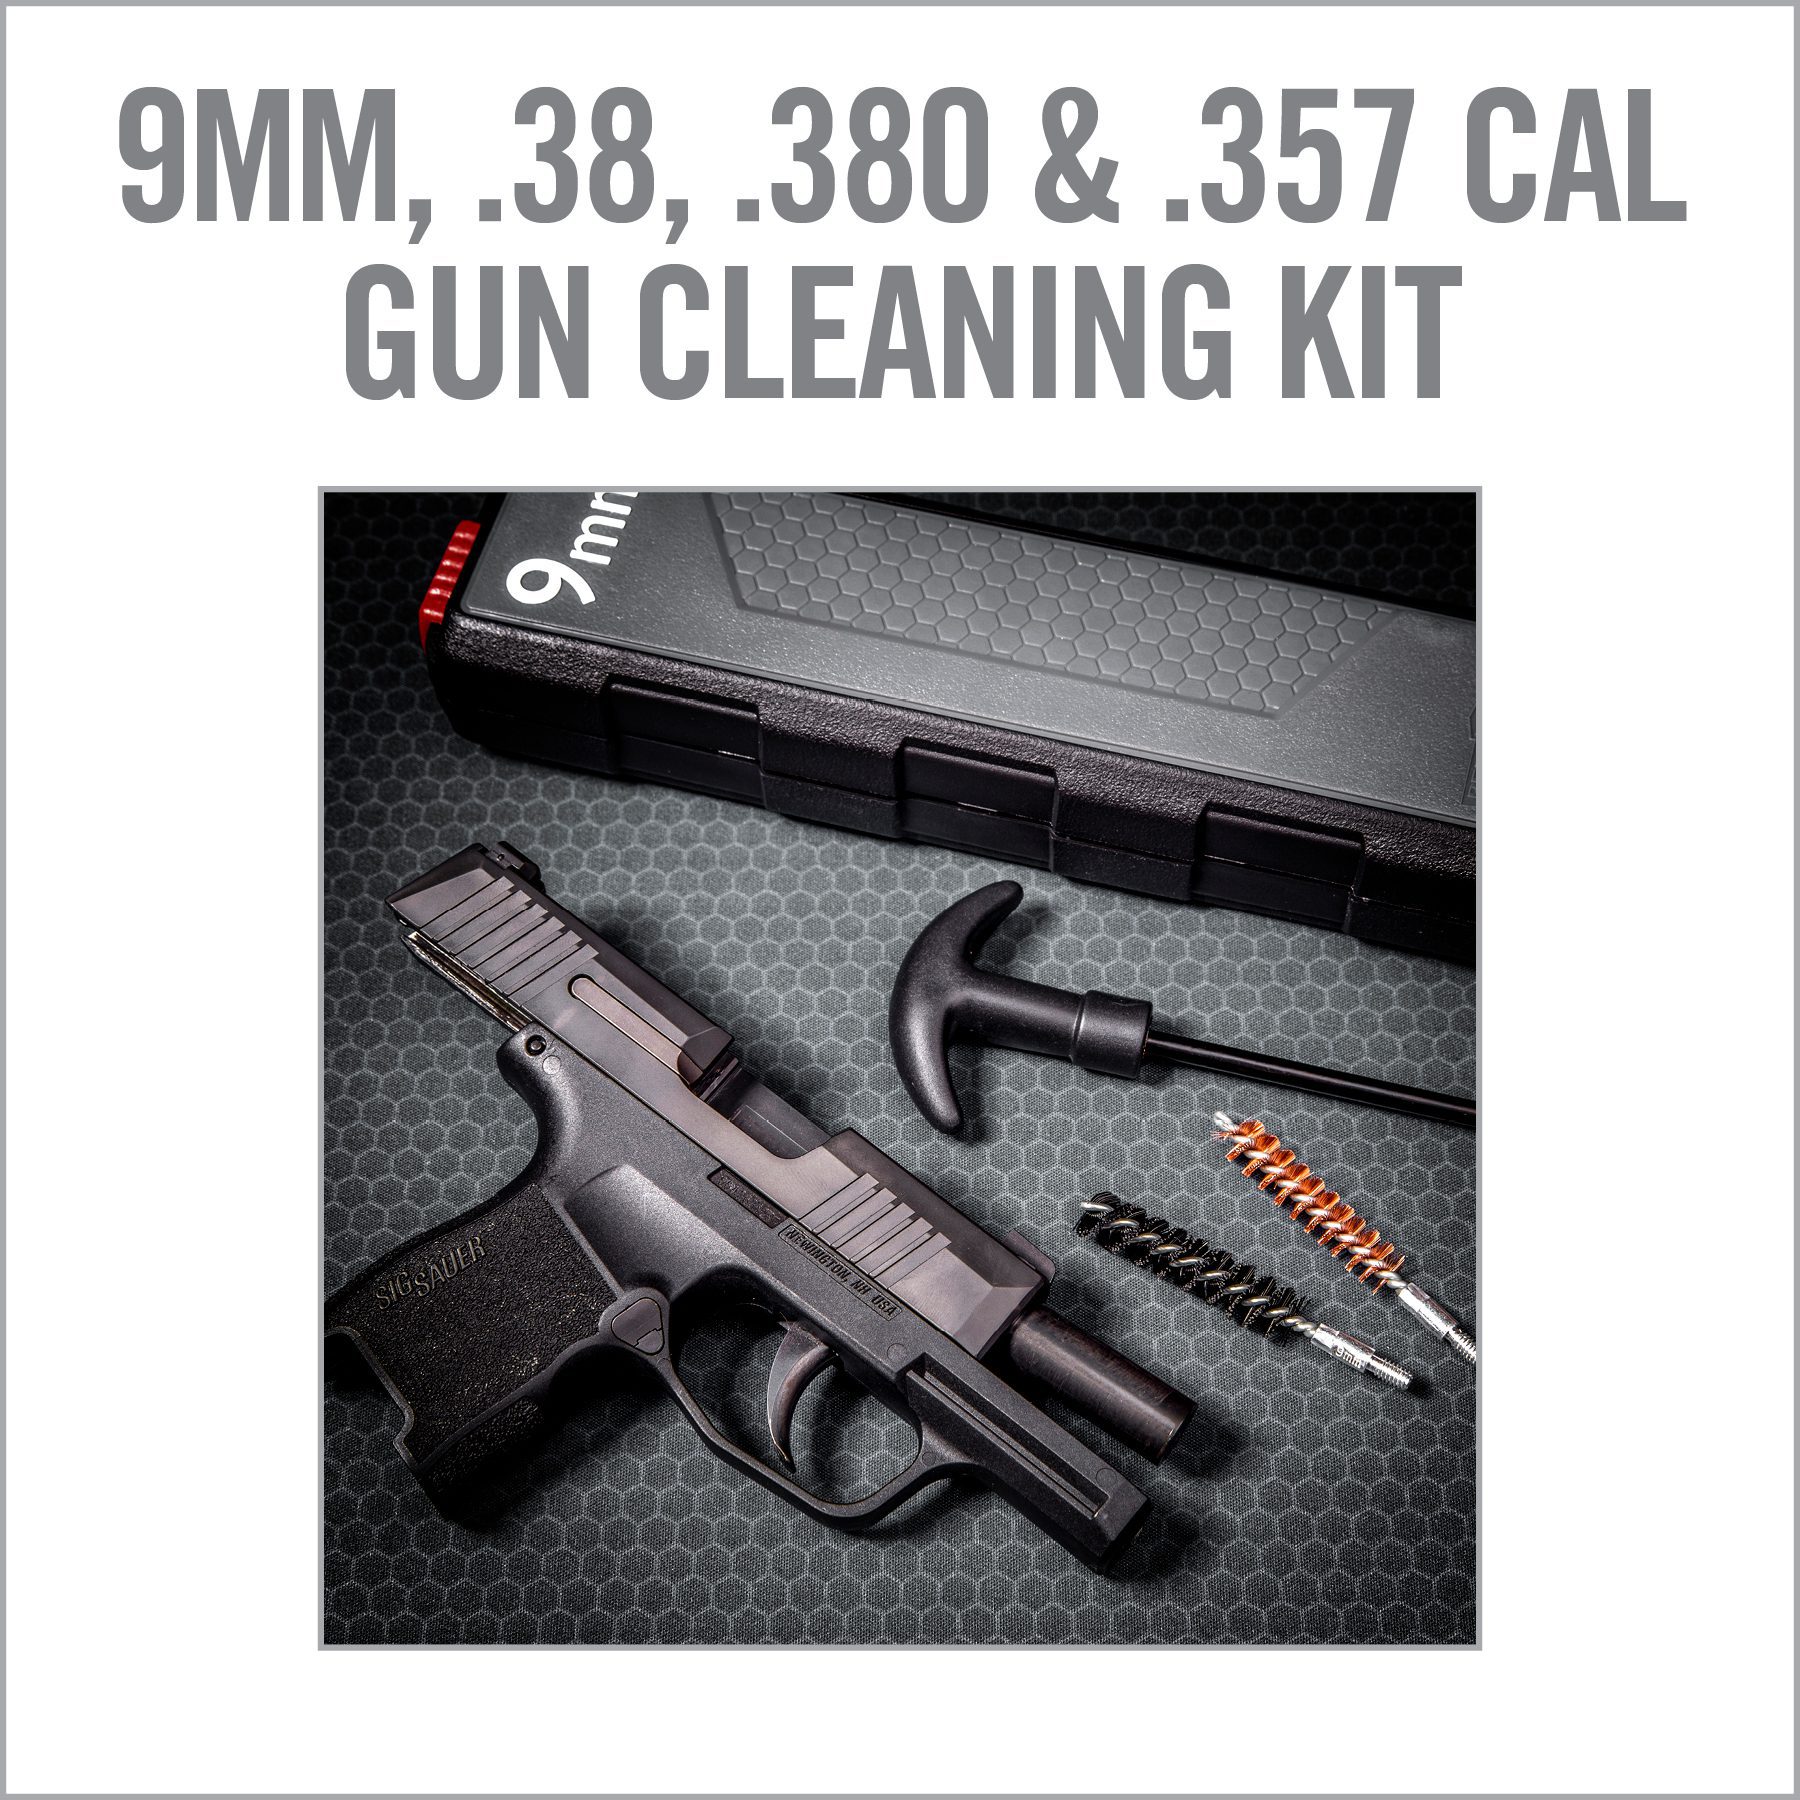 a gun cleaning kit with the words 9mm, 38, 38 & 37 cal